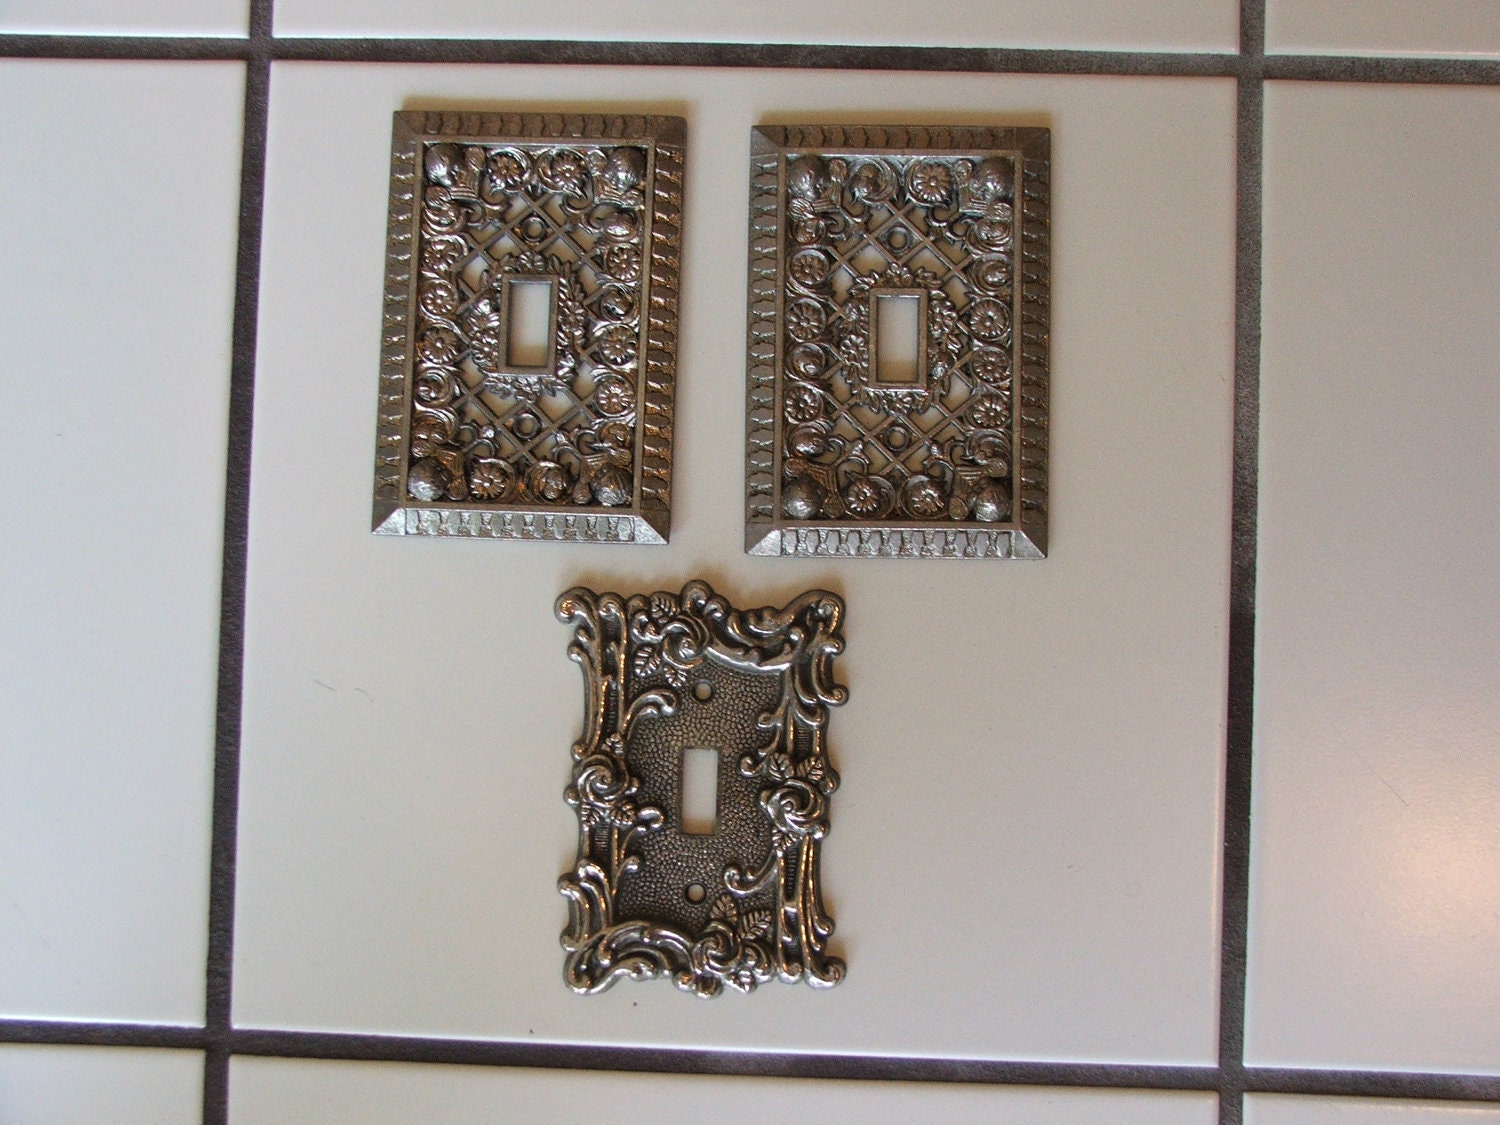 Vintage Ornate Metal Light Switch Cover Plates Outlet Cover